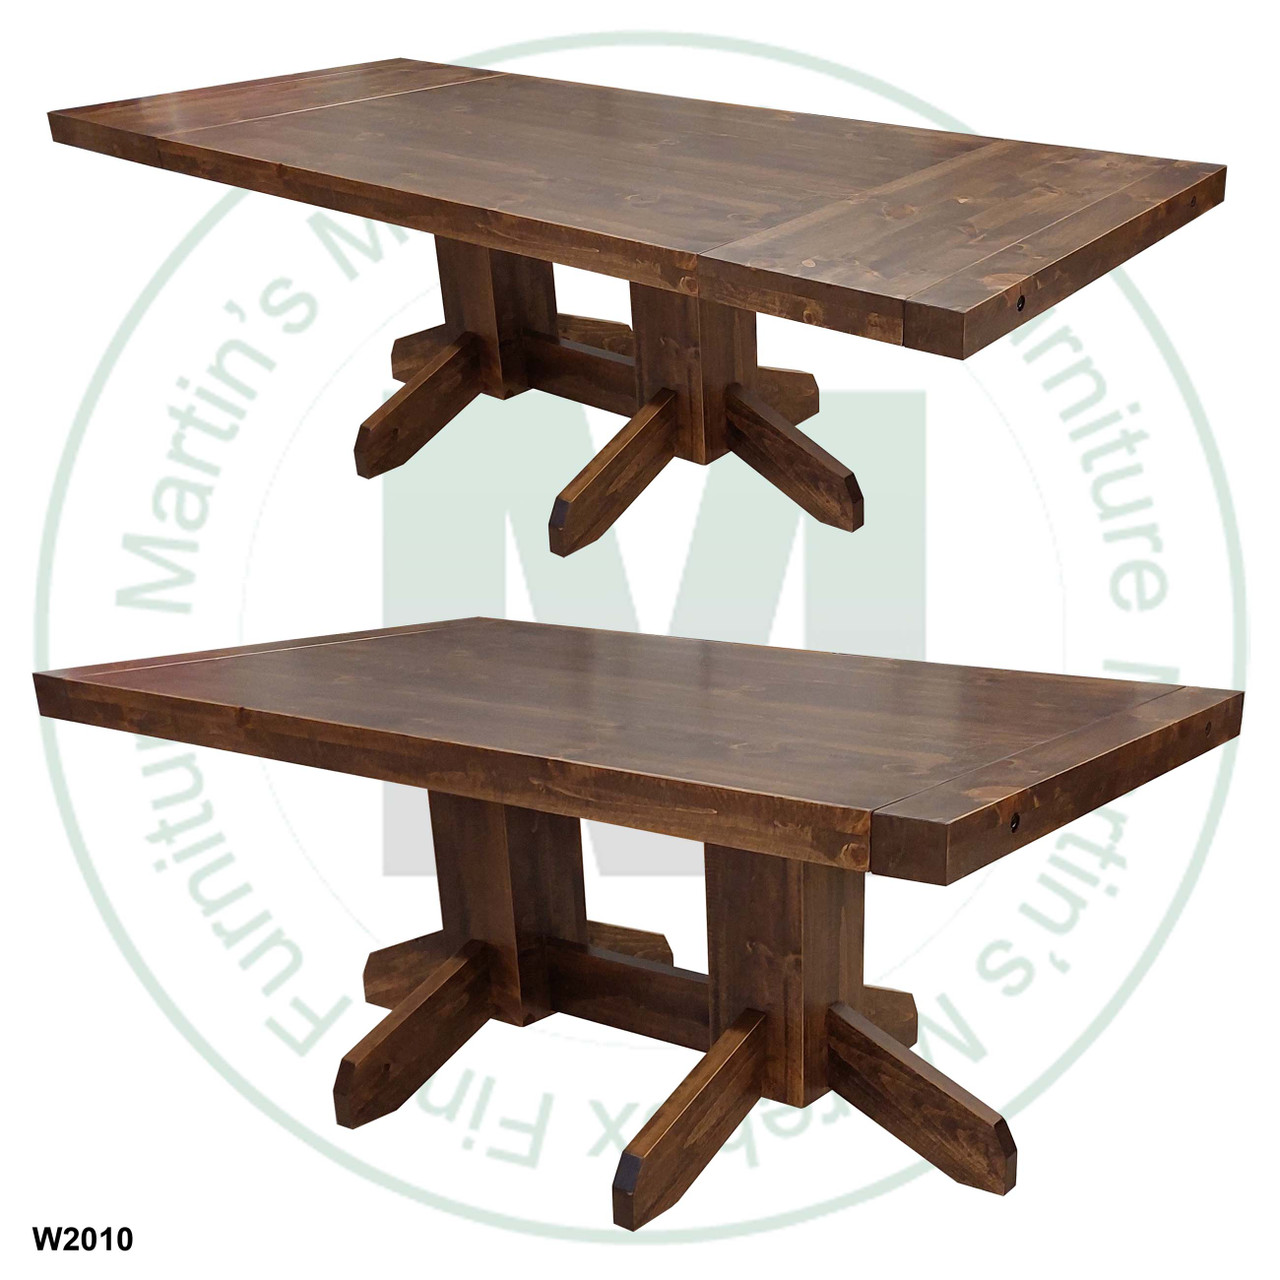 Wormy Maple Yukon Solid Top Double Pedestal Table 48'' Deep x 60'' Wide x 30'' High With 2 - 16'' End Leaves